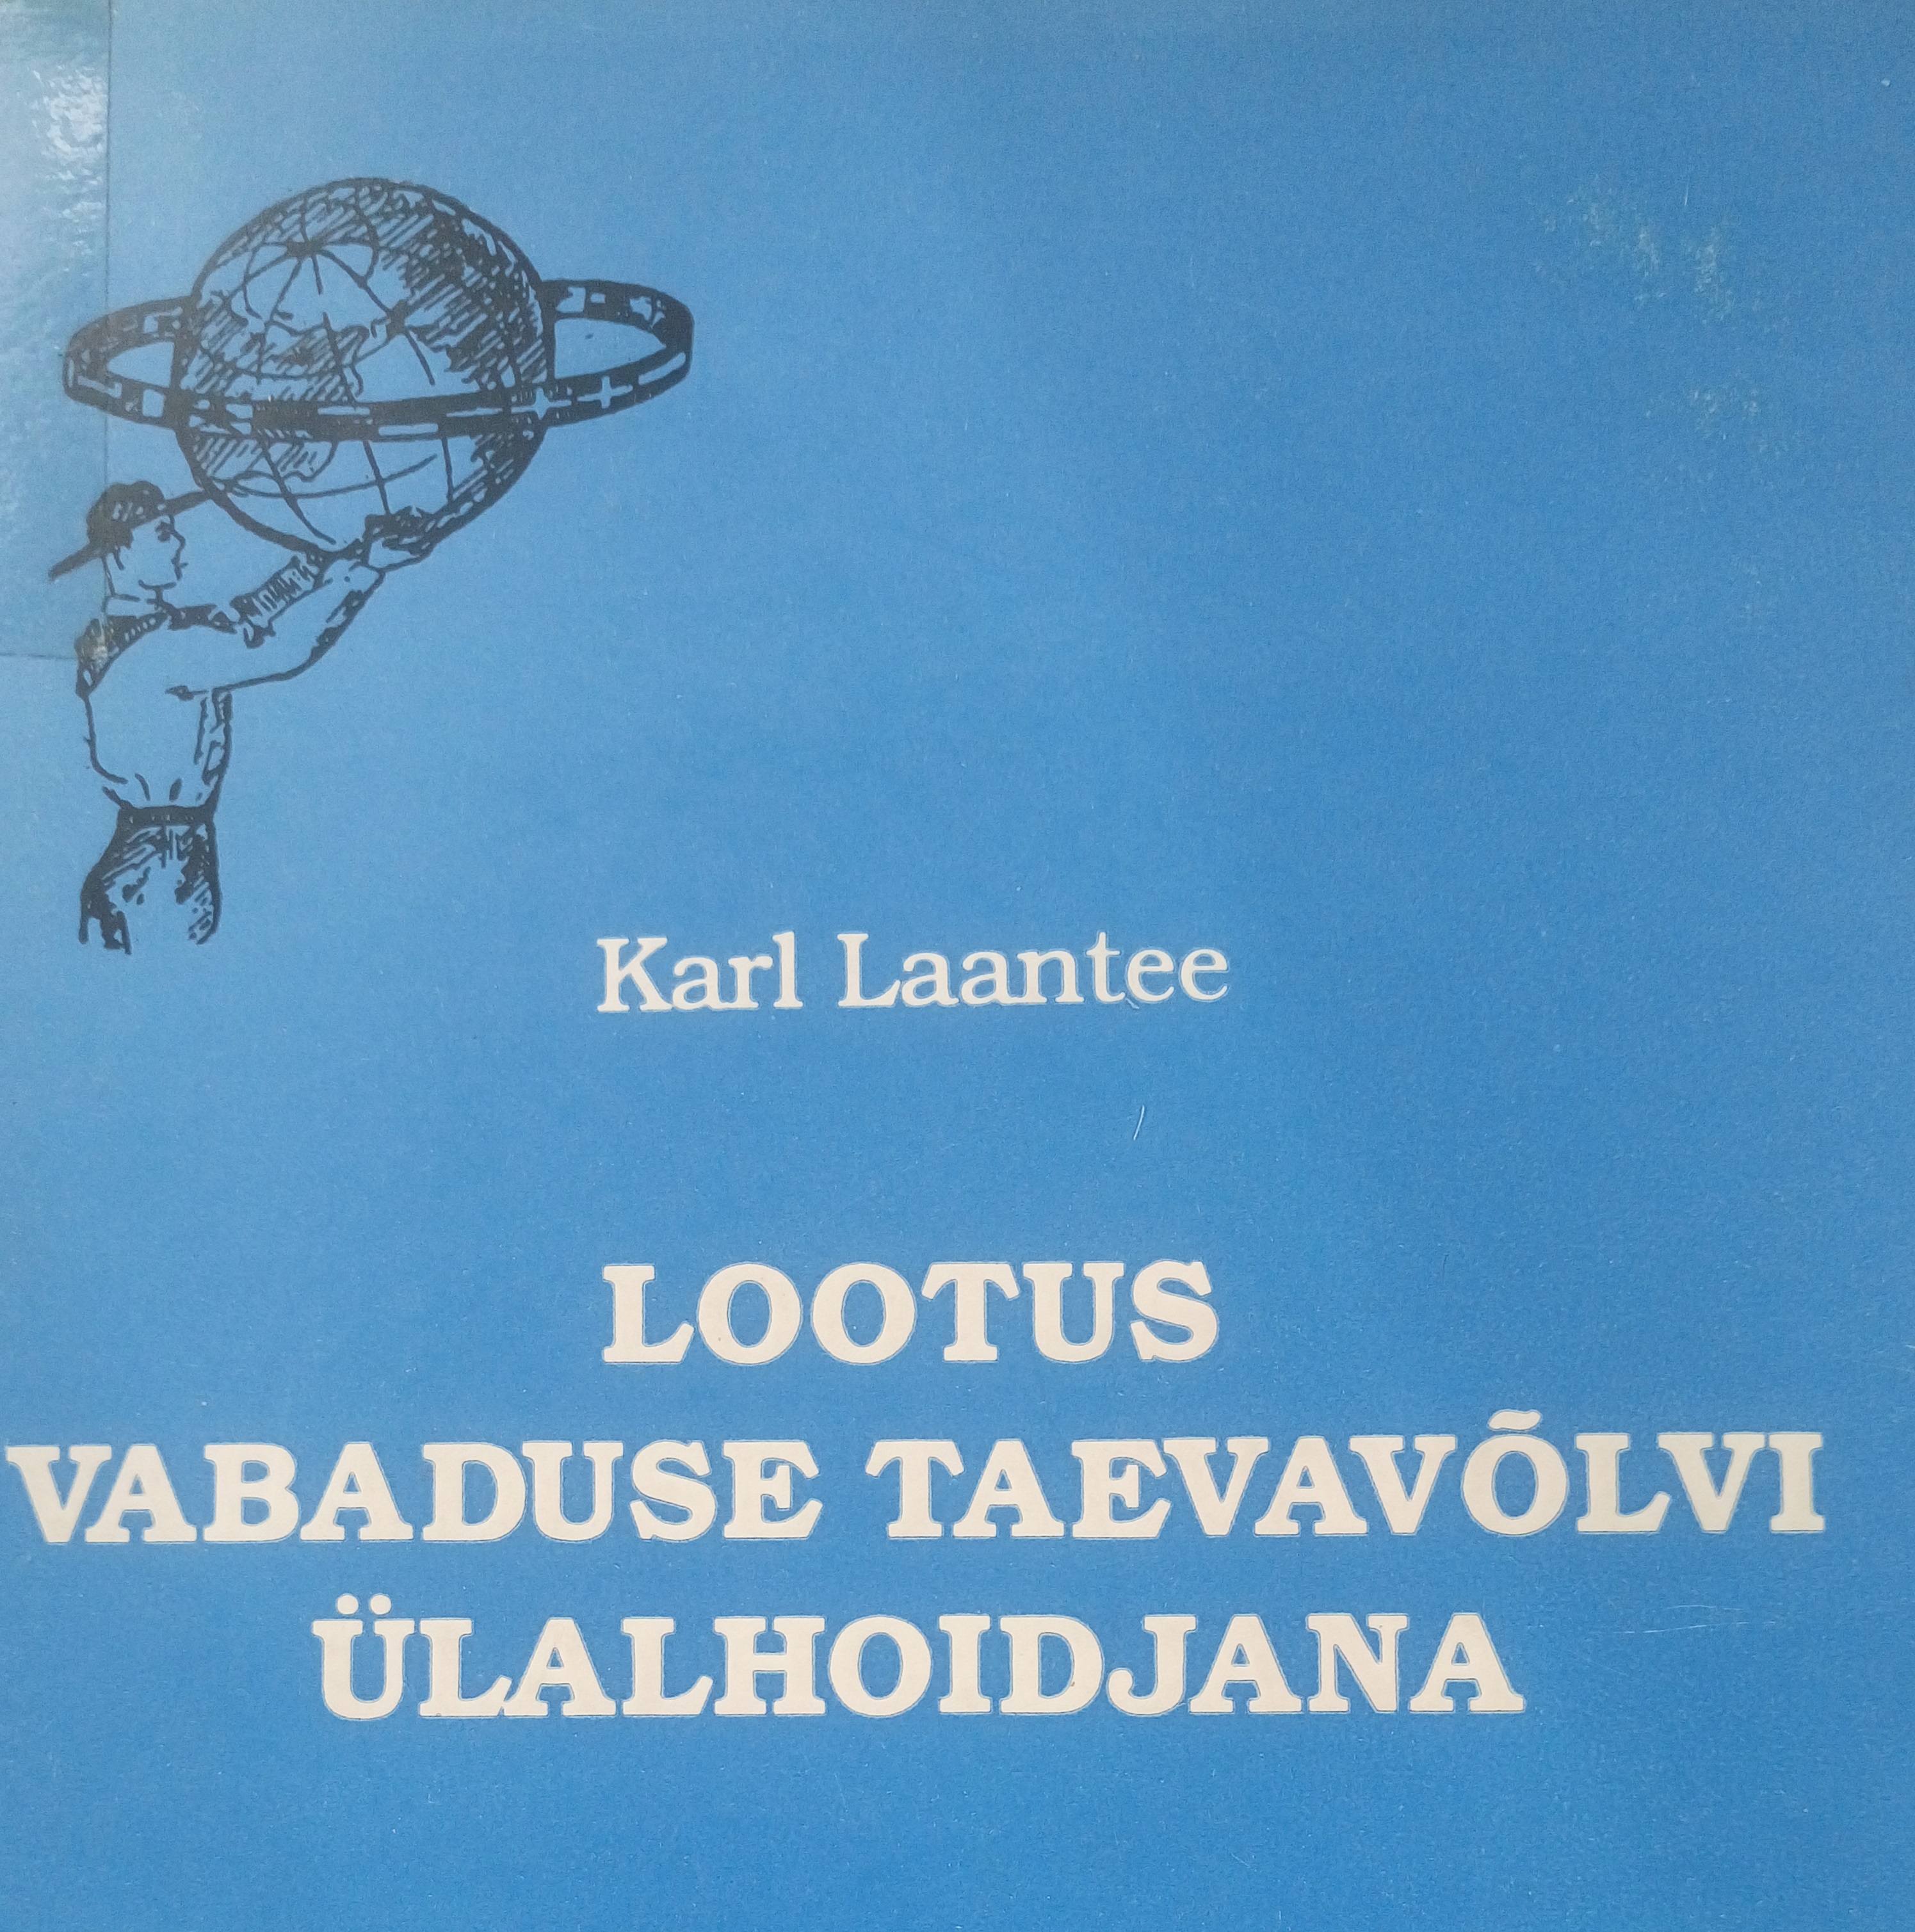 Cover of Karl Laantee's book 'Hope as holder of the firmament of freedom: speeches and writings abut freedom, human rights, independence, national and international relationships. Historic documents from 1948-1994.'